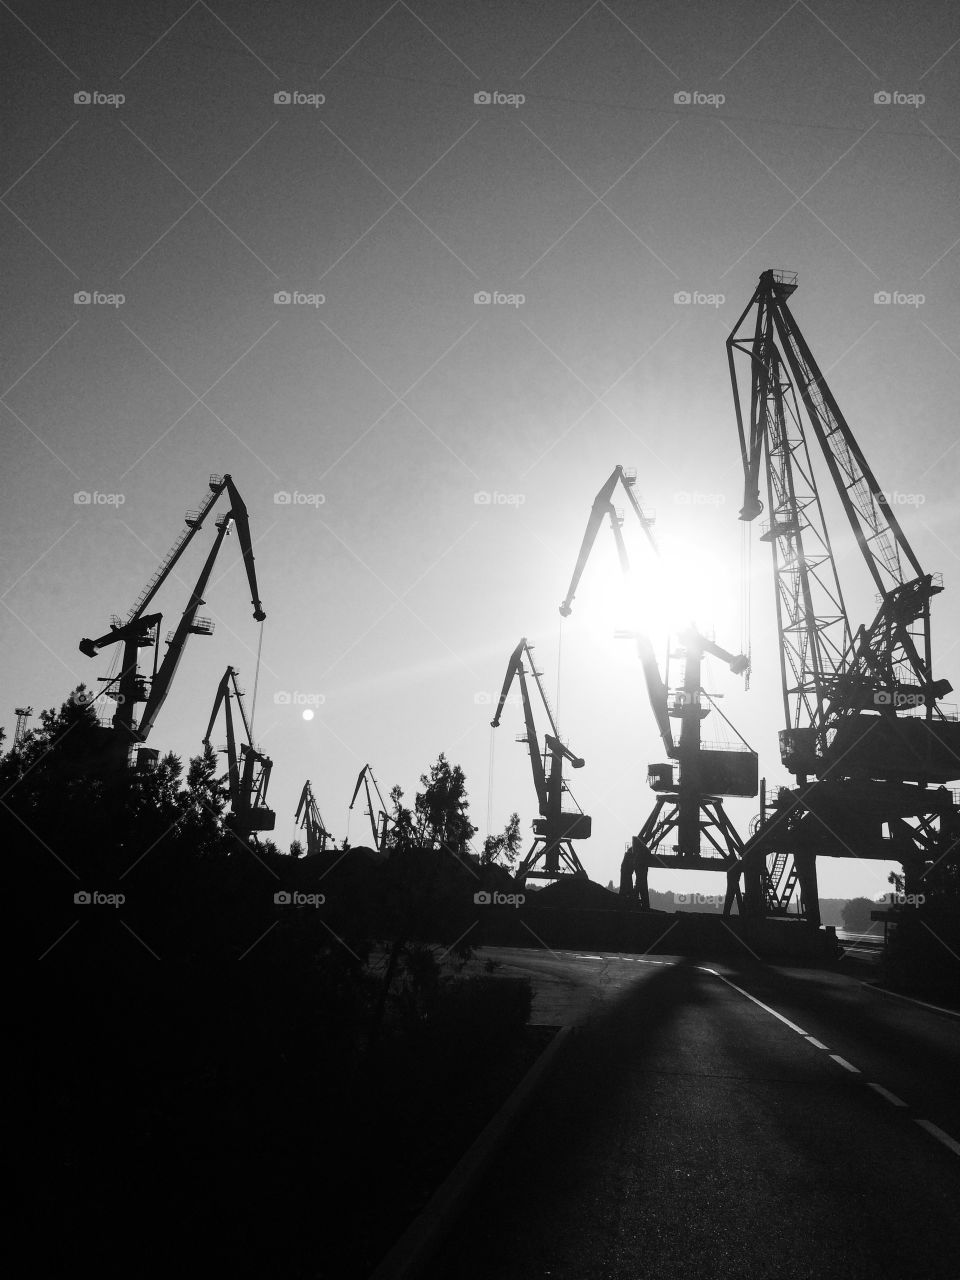 Early in the morning in Izmail sea commercial port. The cargo terminal with cargo cranes. Industrial landscape. 